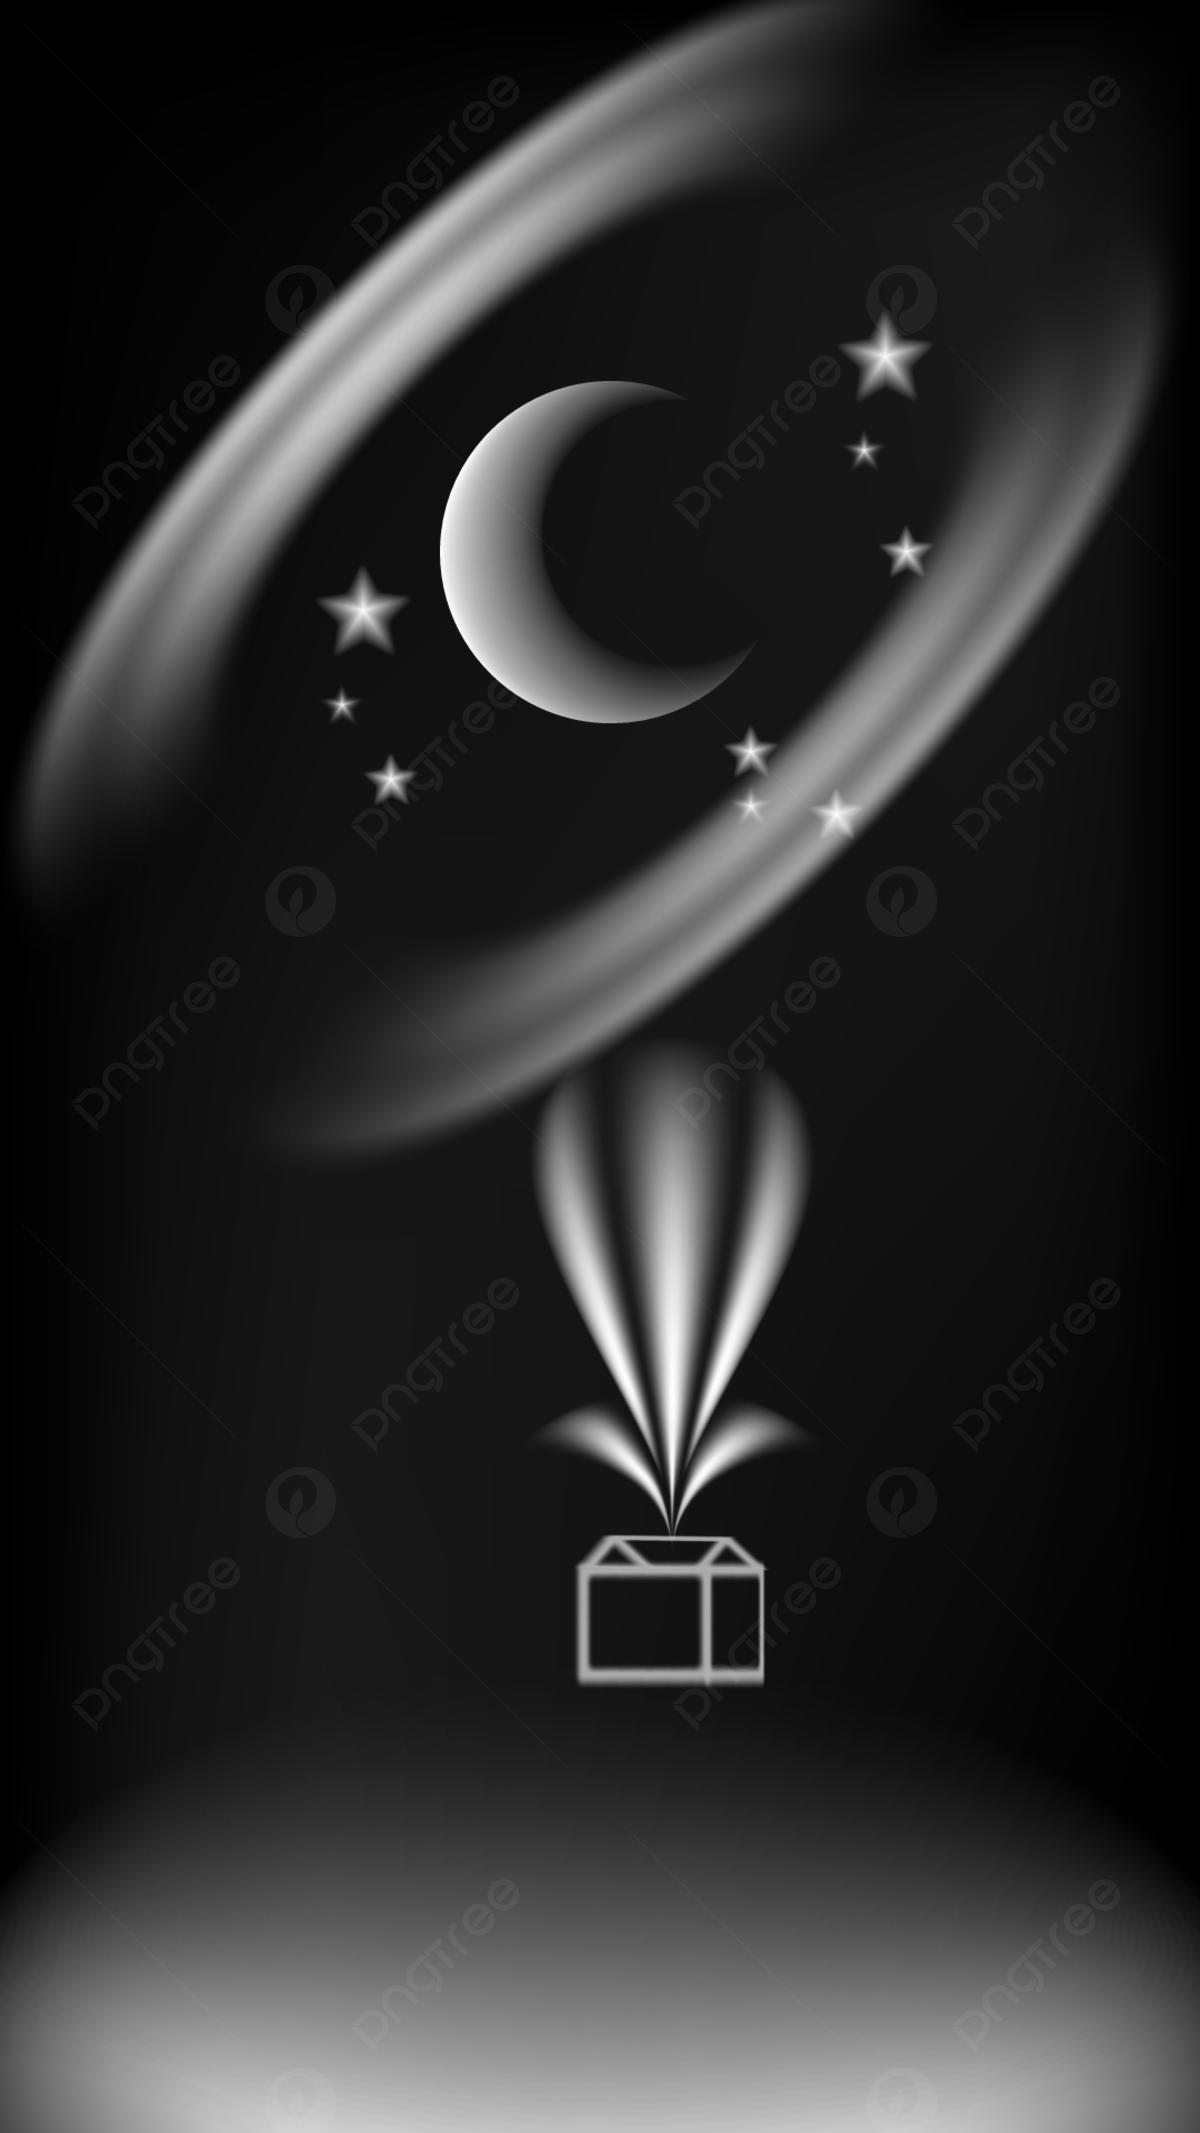 Aesthetic Moon Black And White Wallpaper Background Wallpaper Image For Free Download